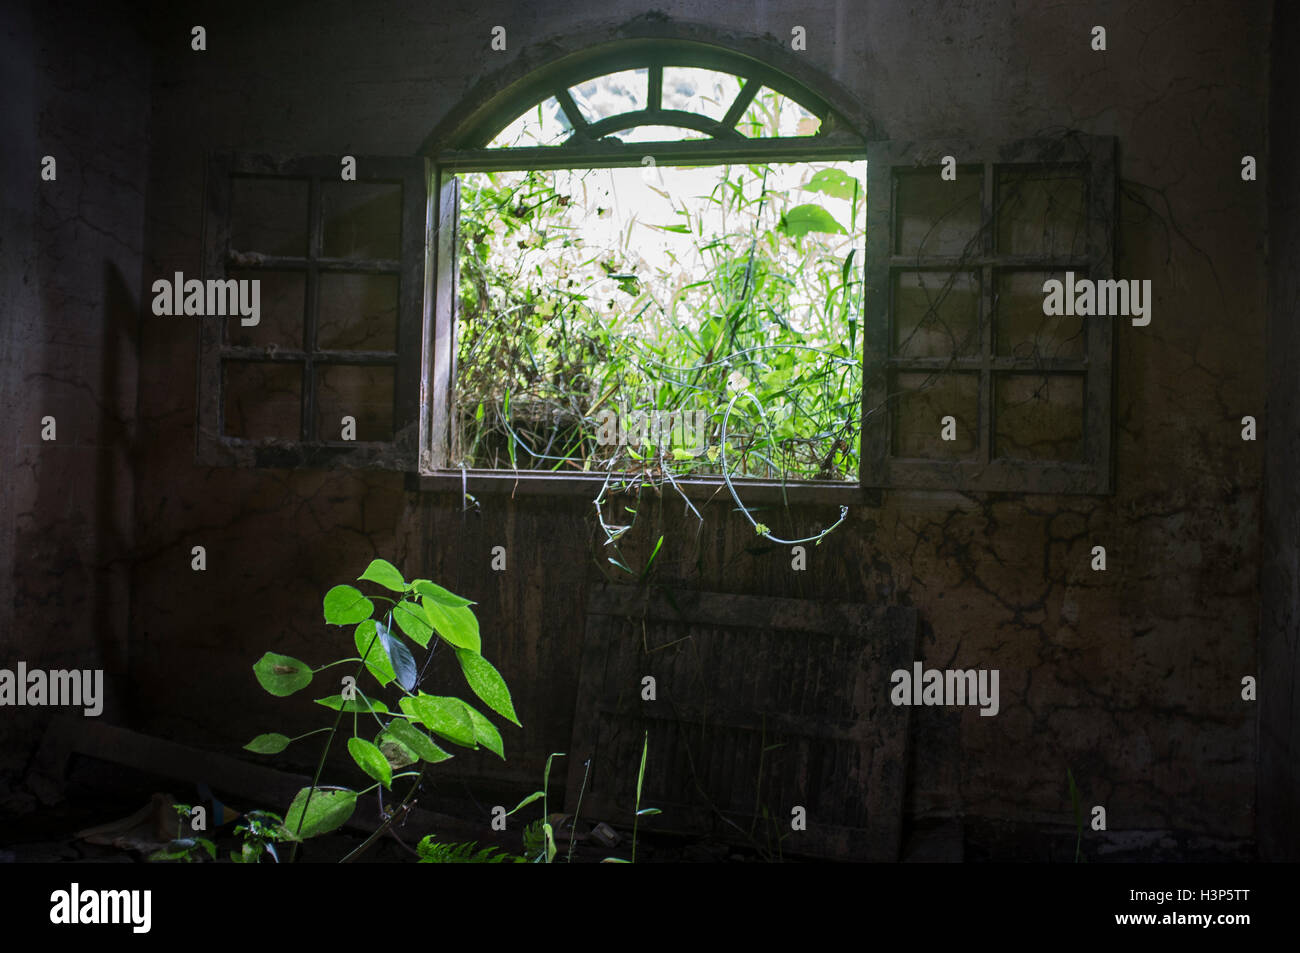 Abandoned house after natural disaster, unlikely situation - plant grows inside house, Nova Friburgo, Rio de Janeiro State, Brazil. Stock Photo